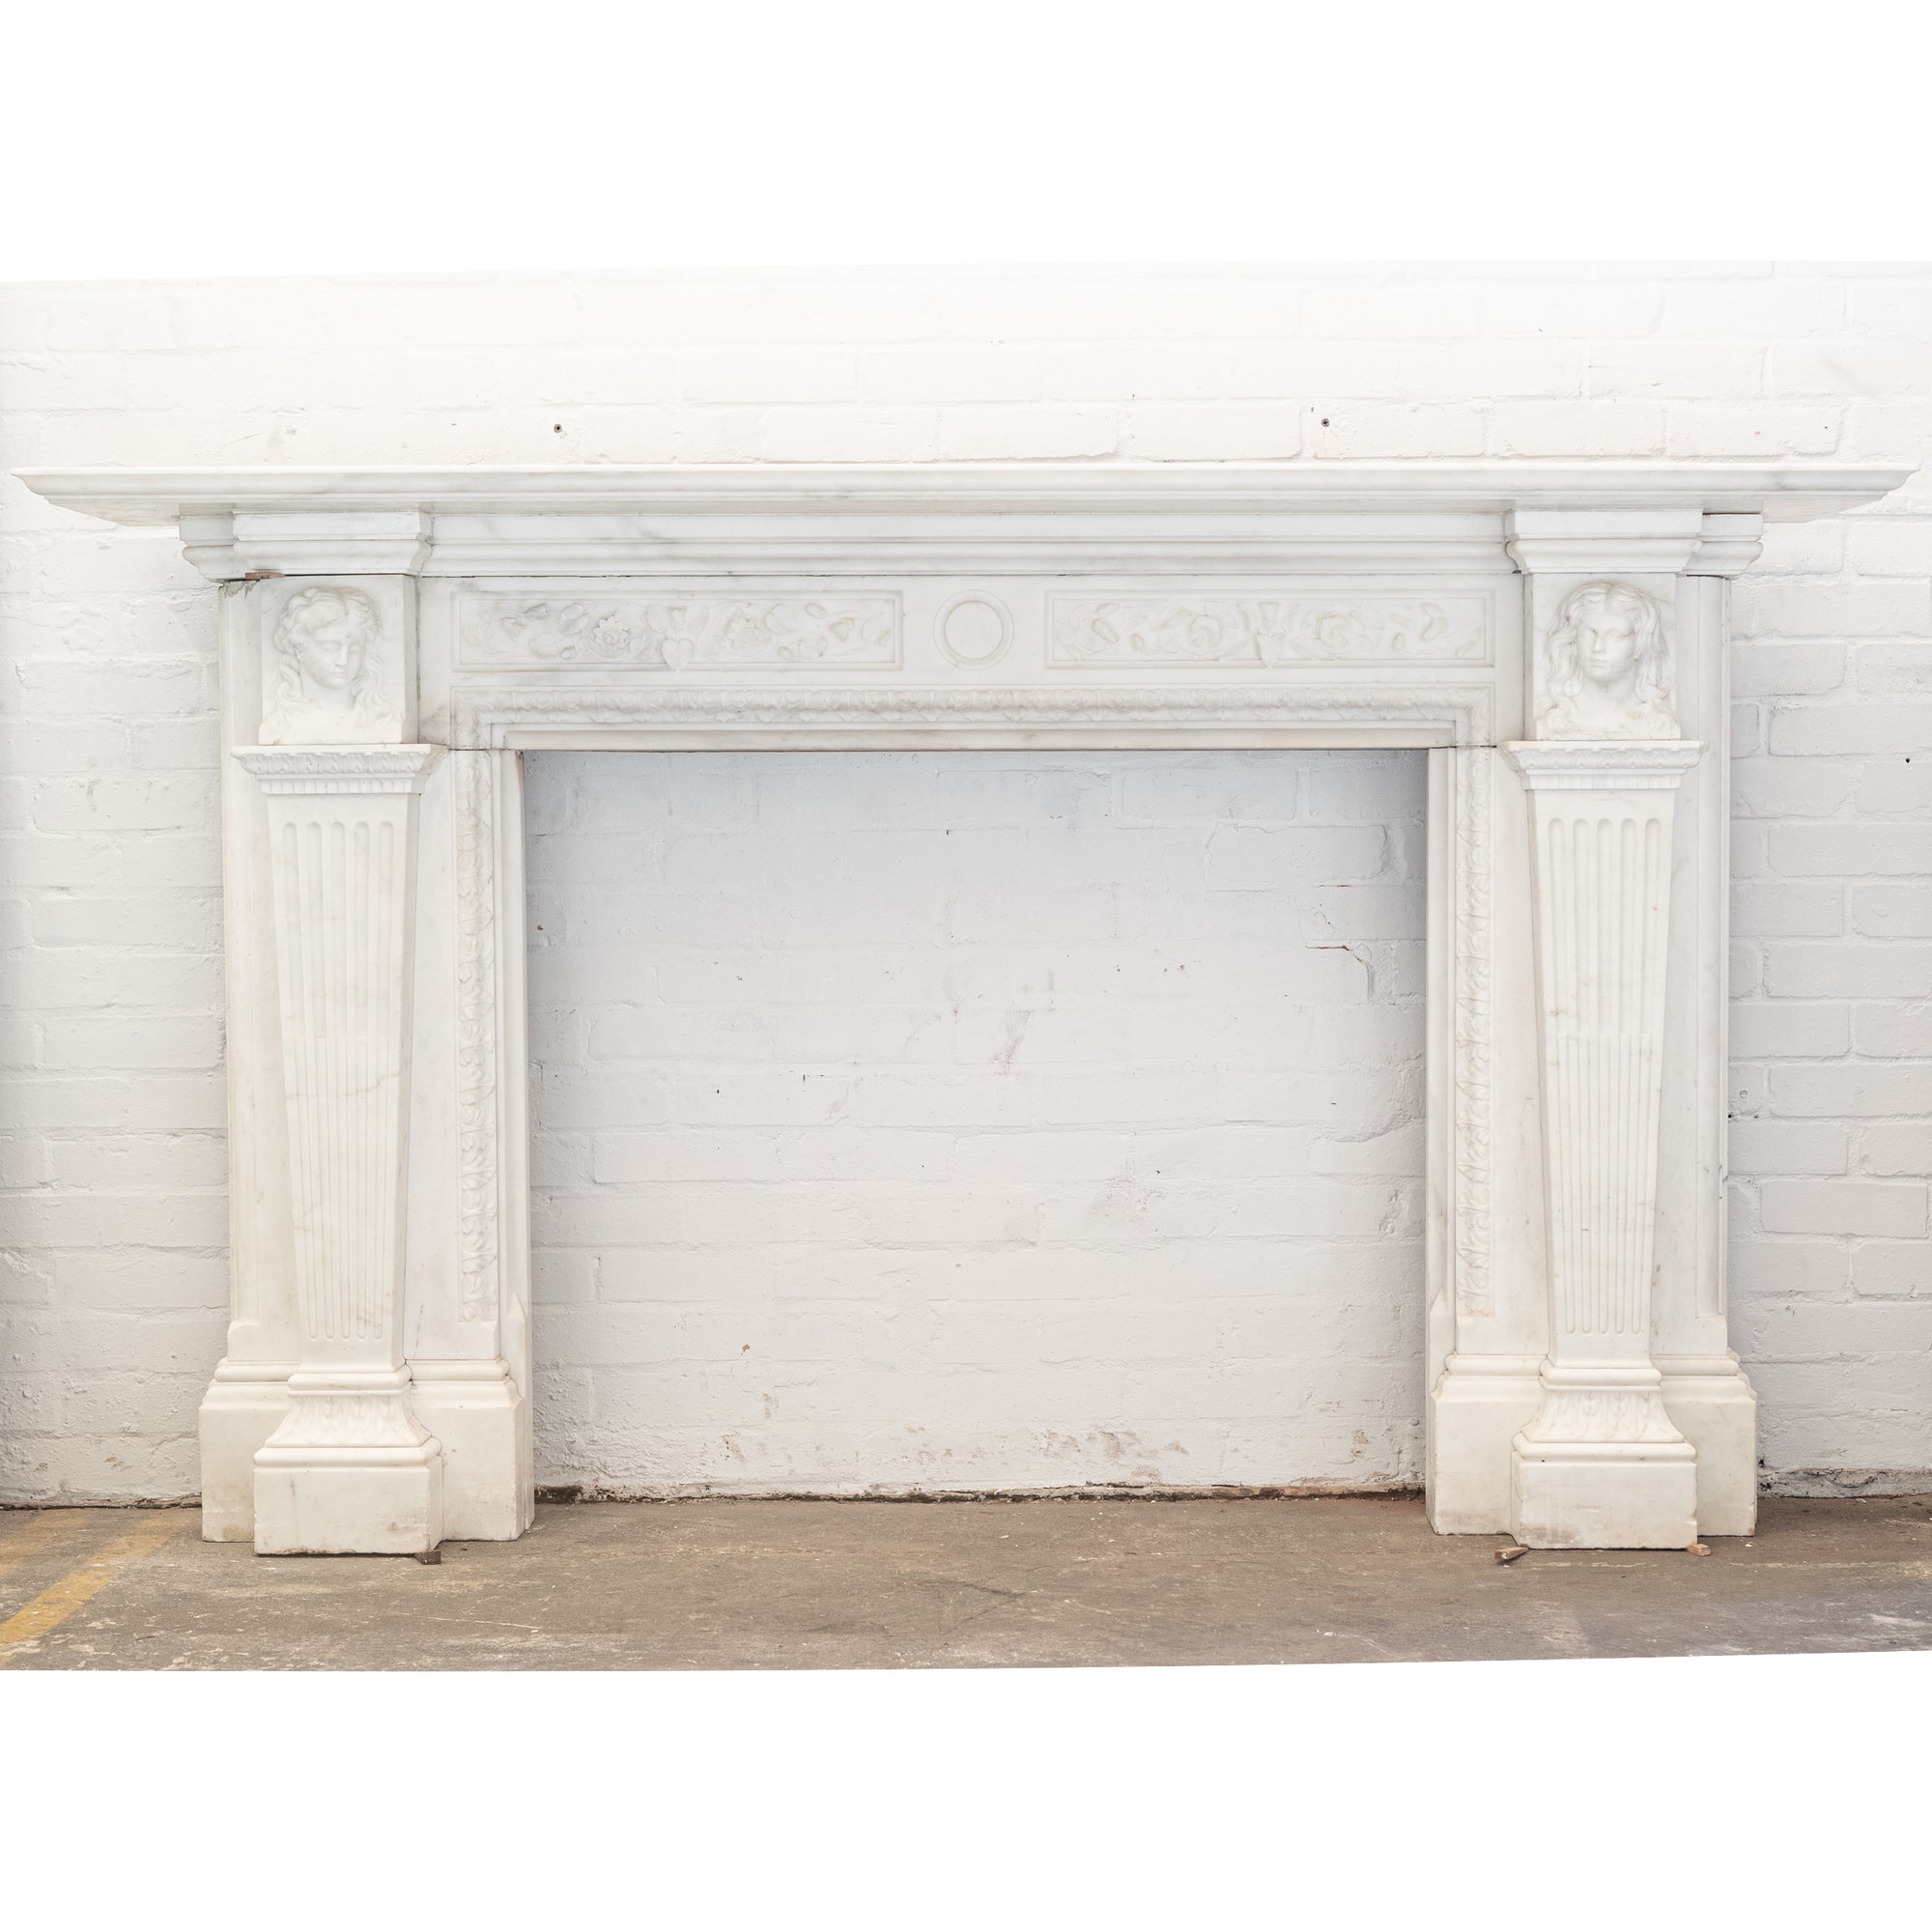 Monumental Antique Statuary Marble Carved Chimneypiece | The Architectural Forum